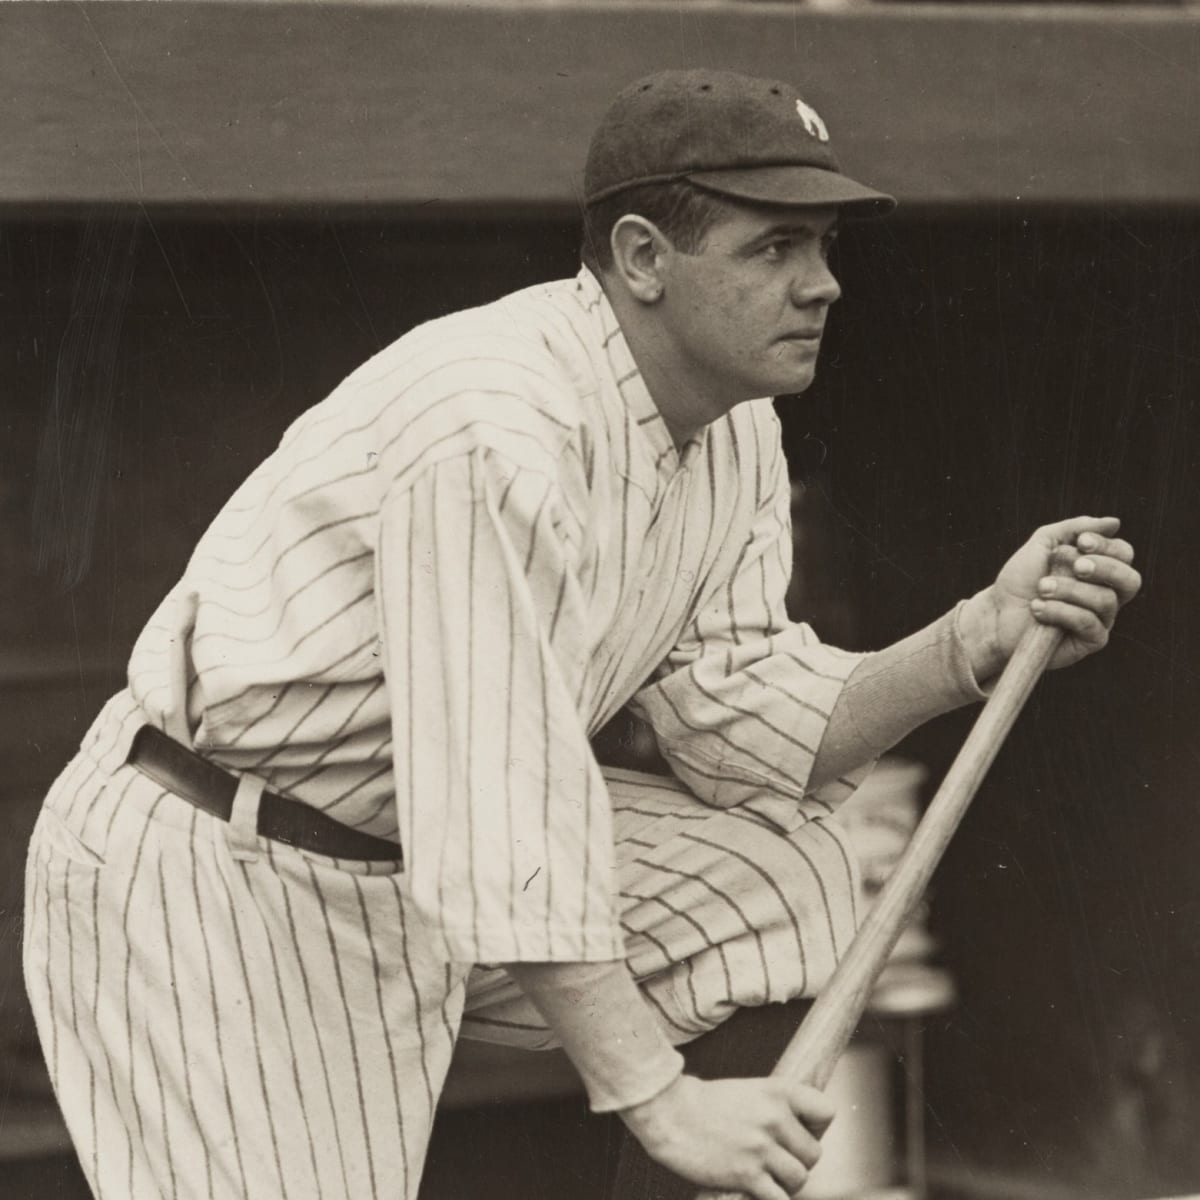 Today in Baseball History: Babe Ruth Becomes 1st Player to Hit 500